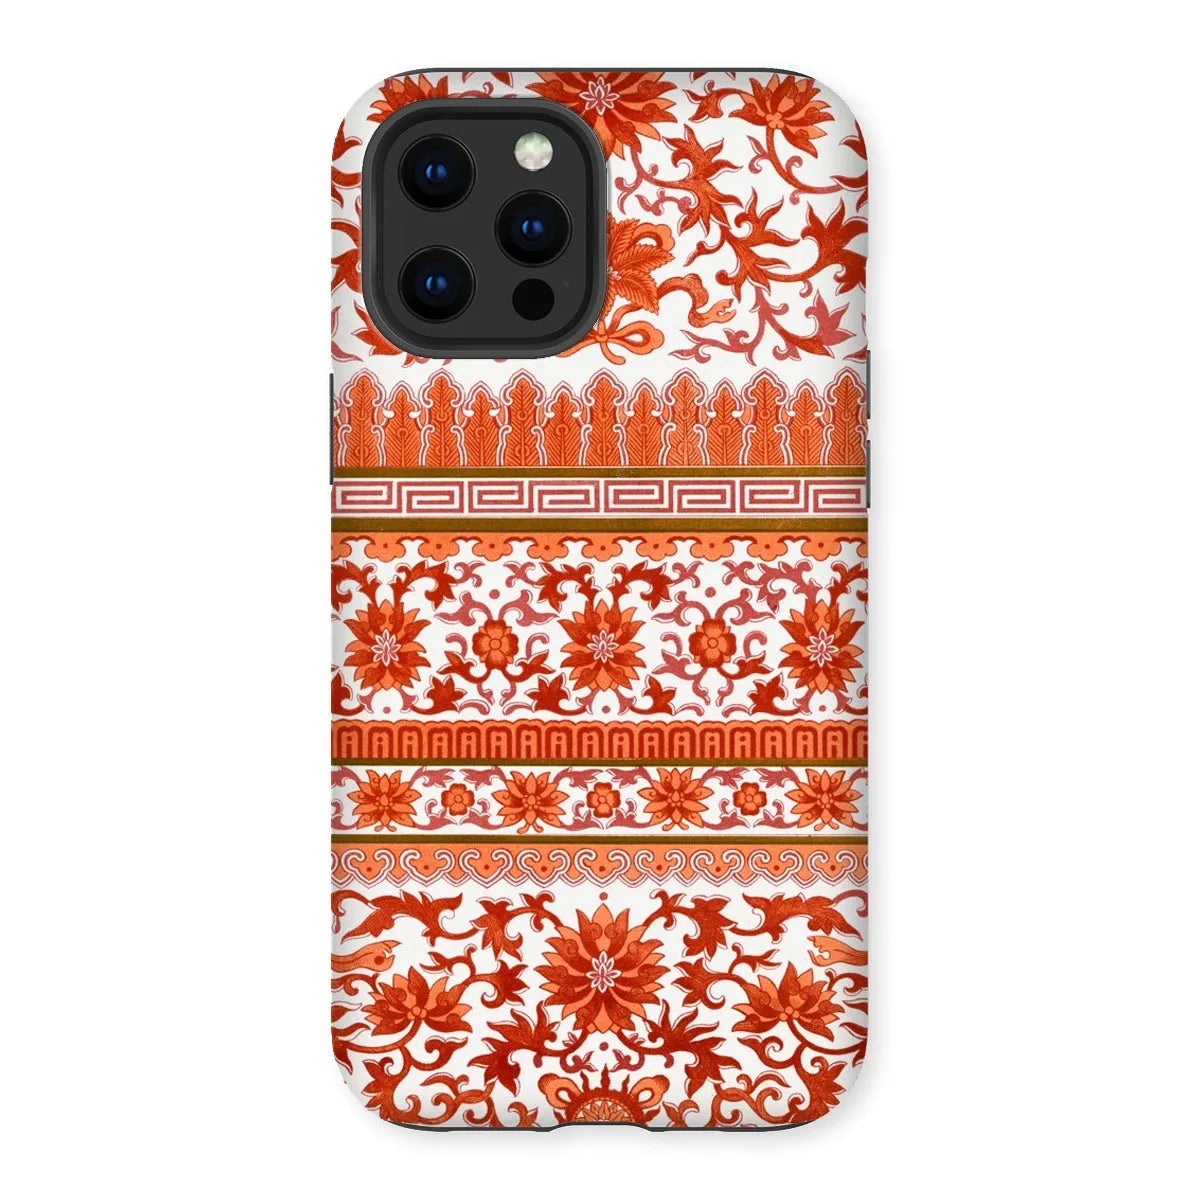 Fiery Chinese Floral Aesthetic Art Phone Case - Owen Jones - Iphone 12 Pro Max / Matte - Mobile Phone Cases - Aesthetic